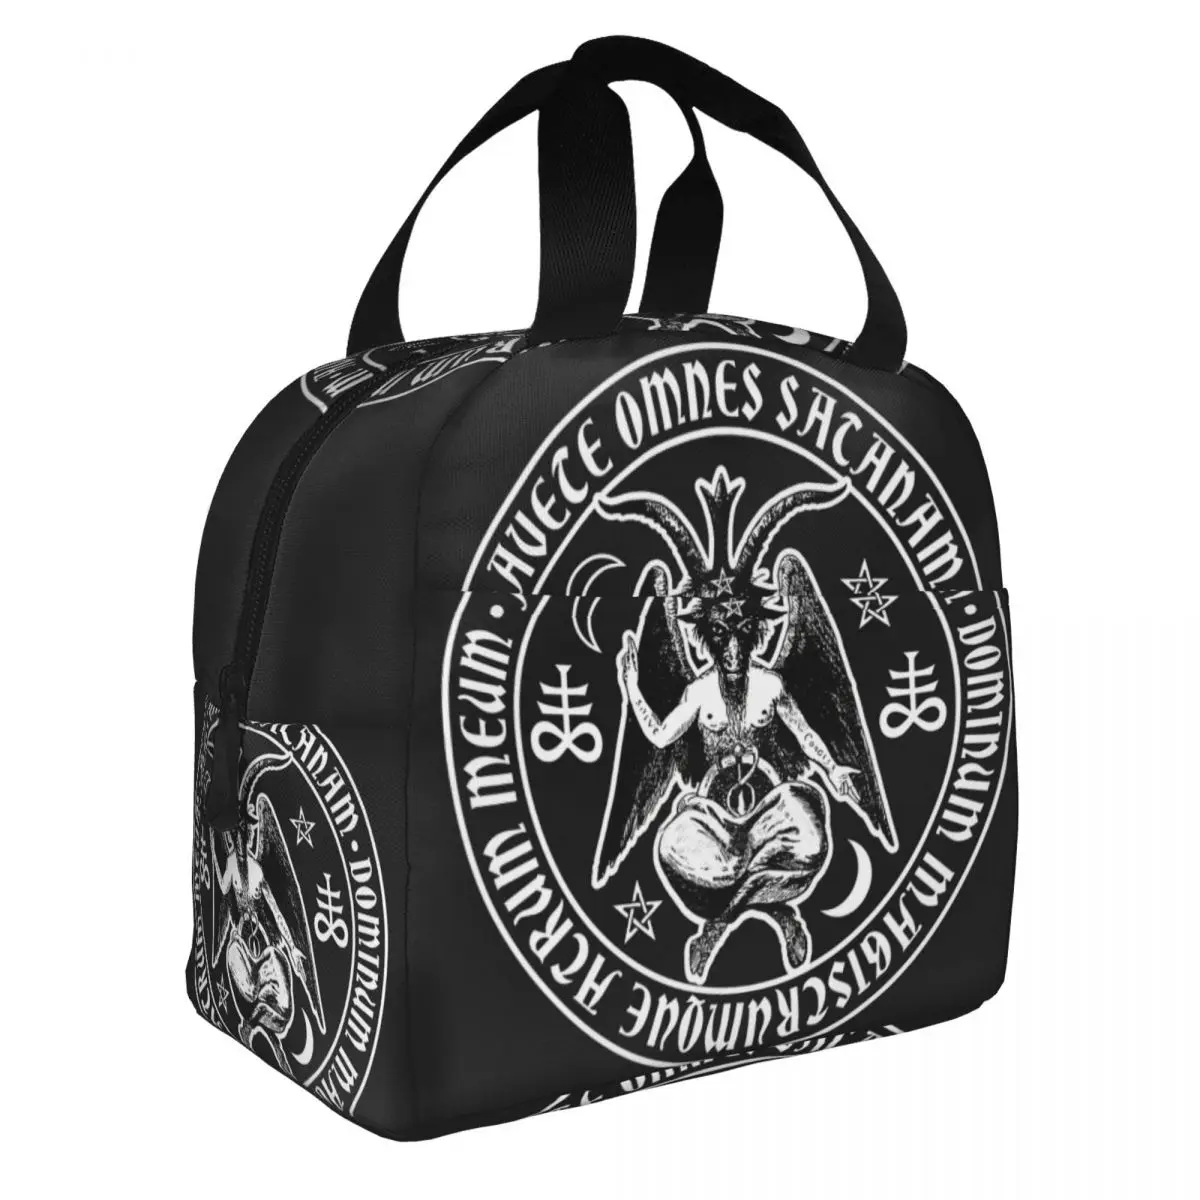 Baphomet Satanic Crosses With Hail Lunch Bento Bags Portable Aluminum Foil thickened Thermal Cloth Lunch Bag for Women Men Boy